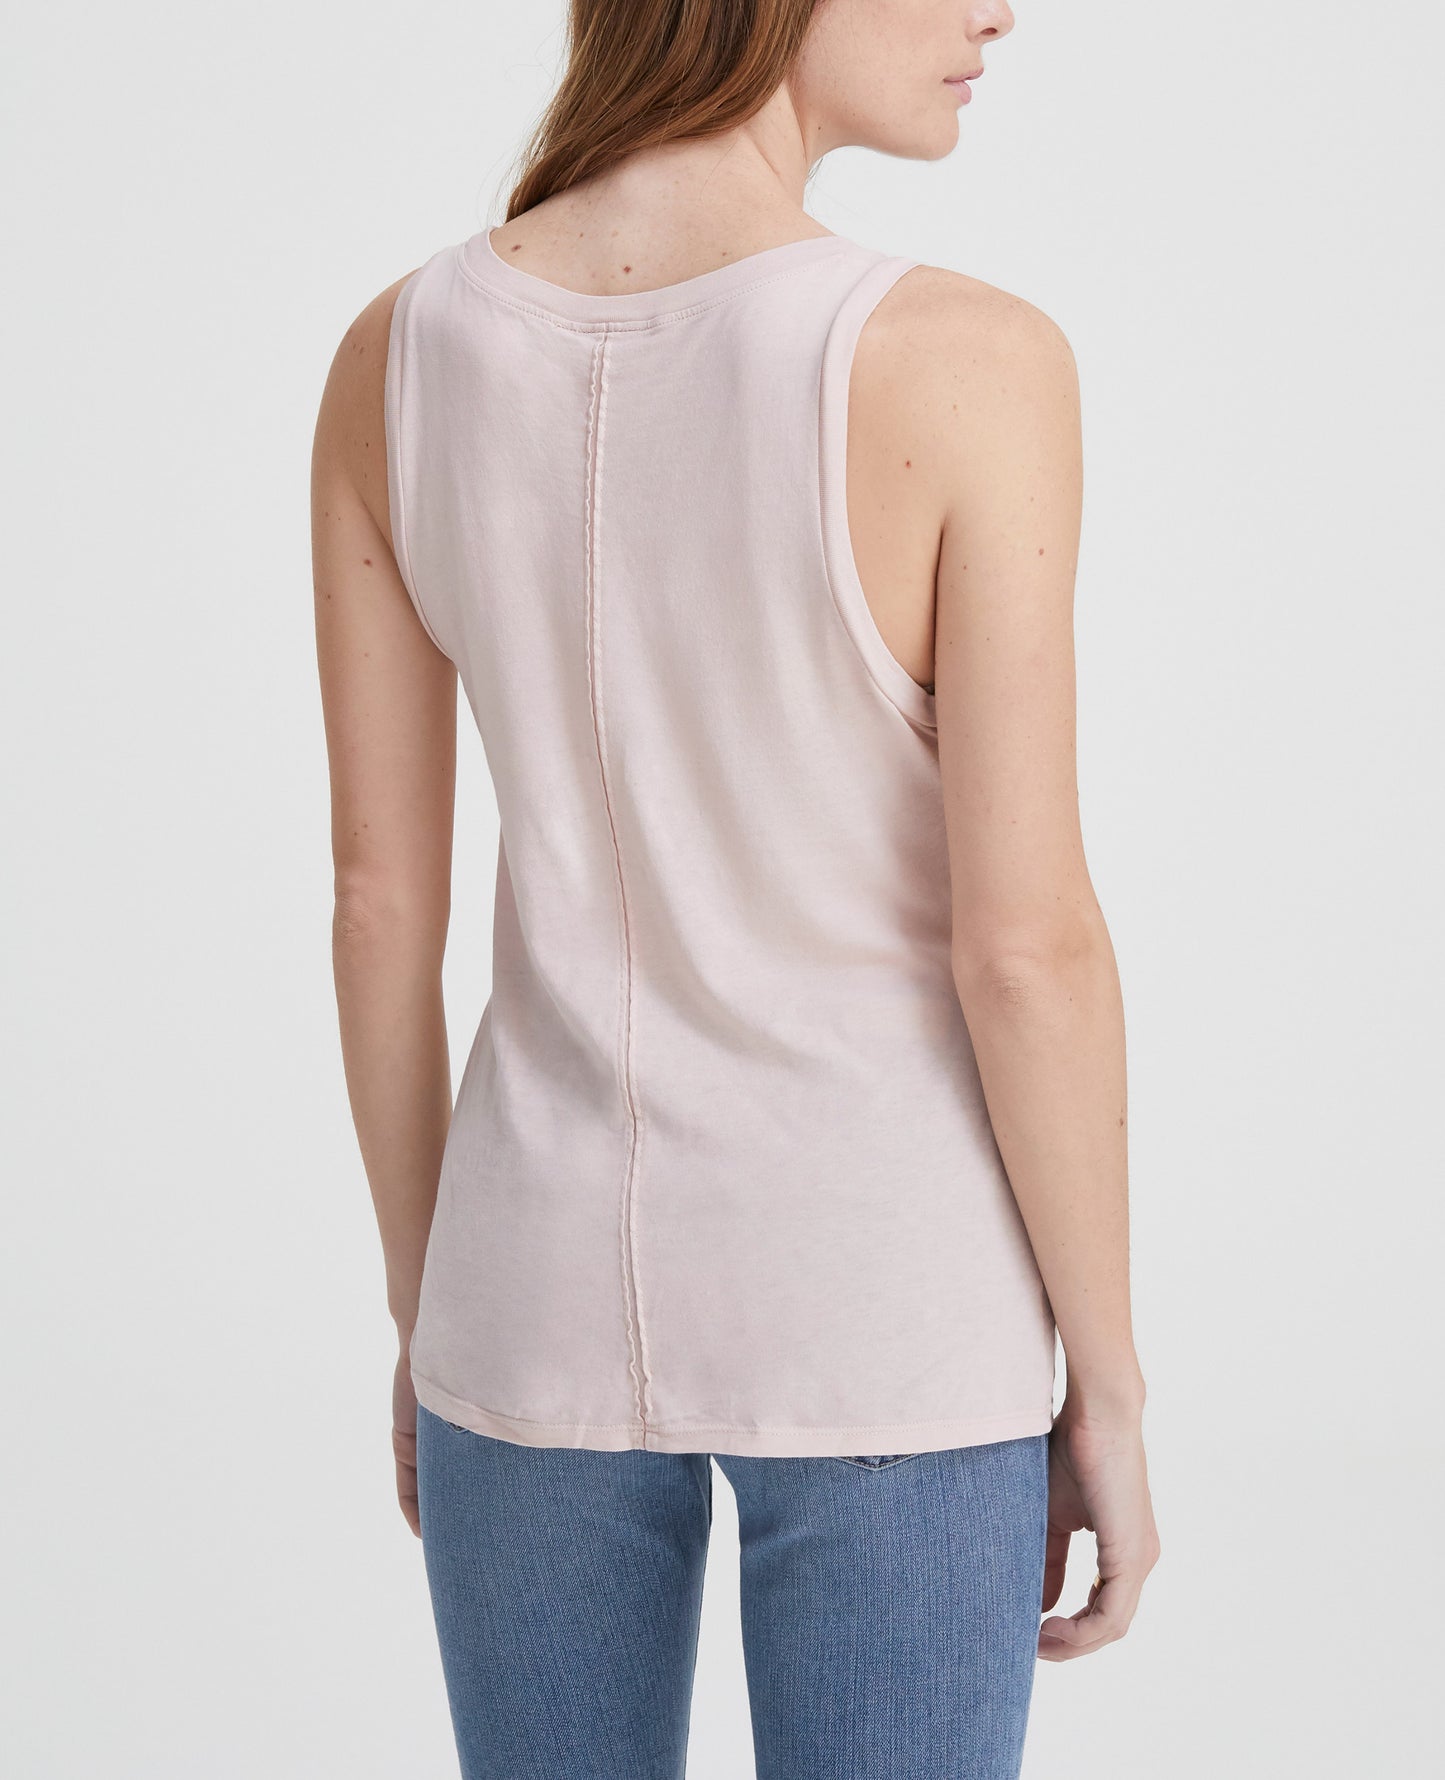 Cambria Tank Peaked Pink Classic Scoop Tank Women Tops Photo 2